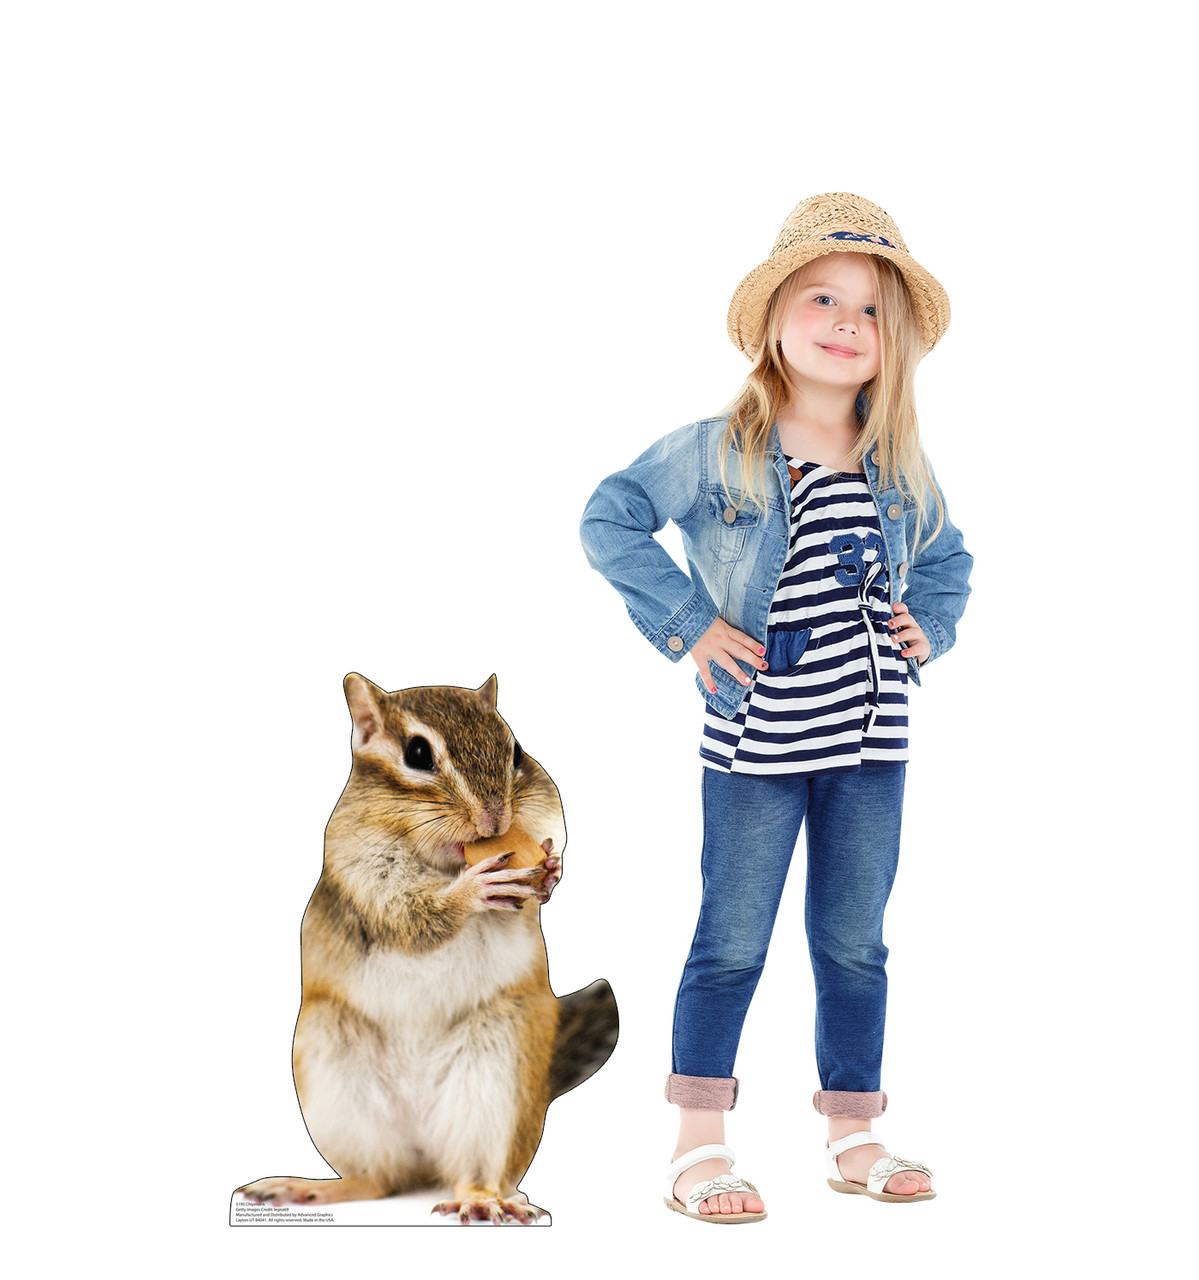 Life-size cardboard standee of a Chipmunk with model.